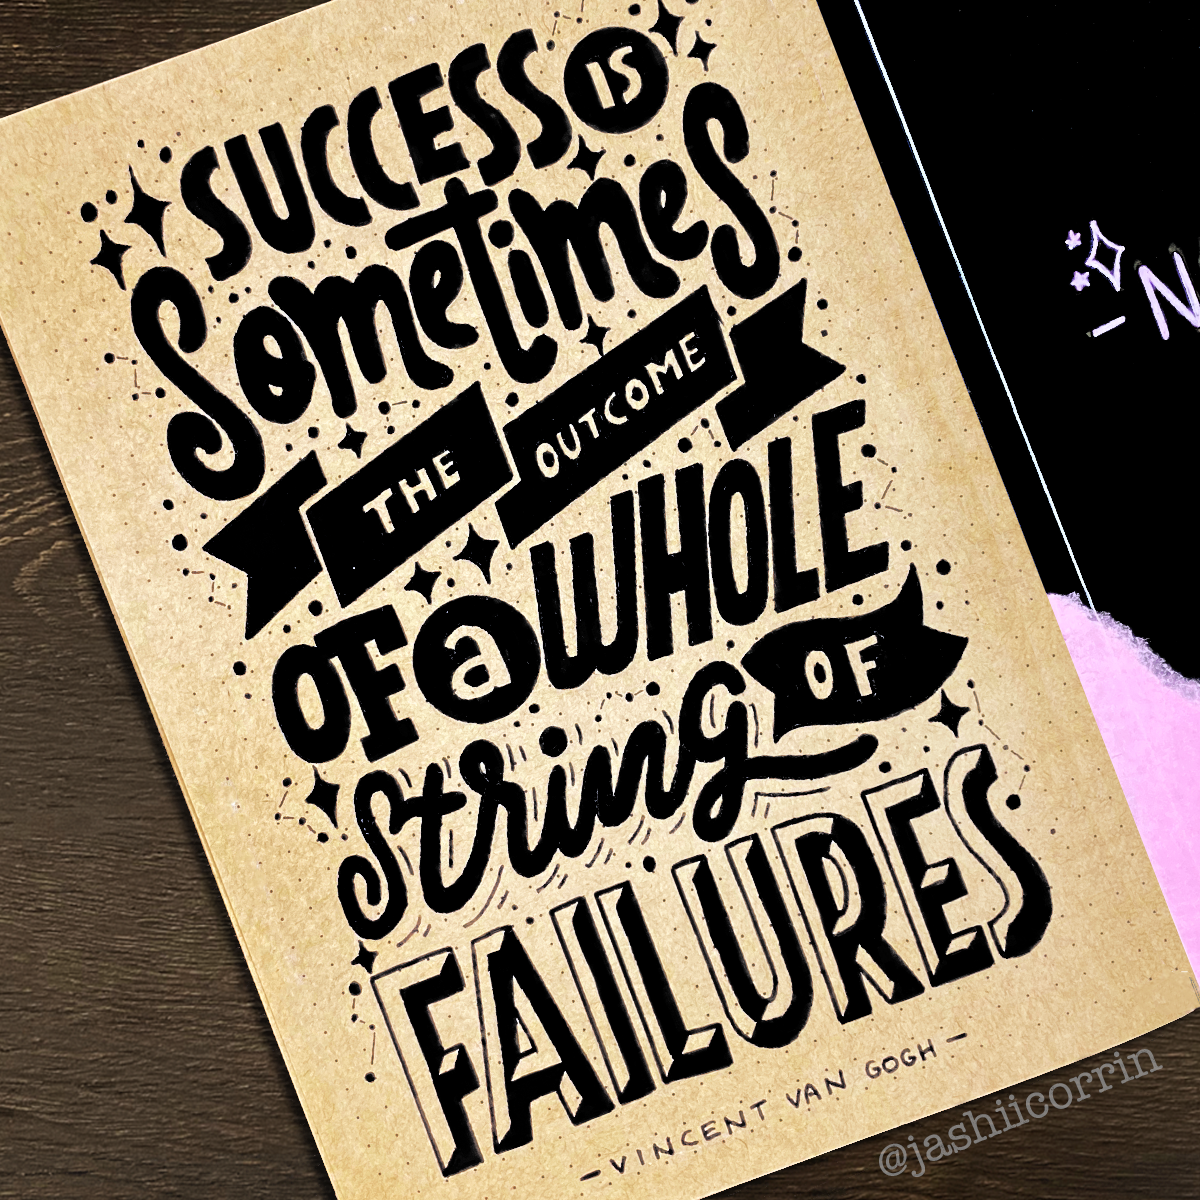 success is a string of failures